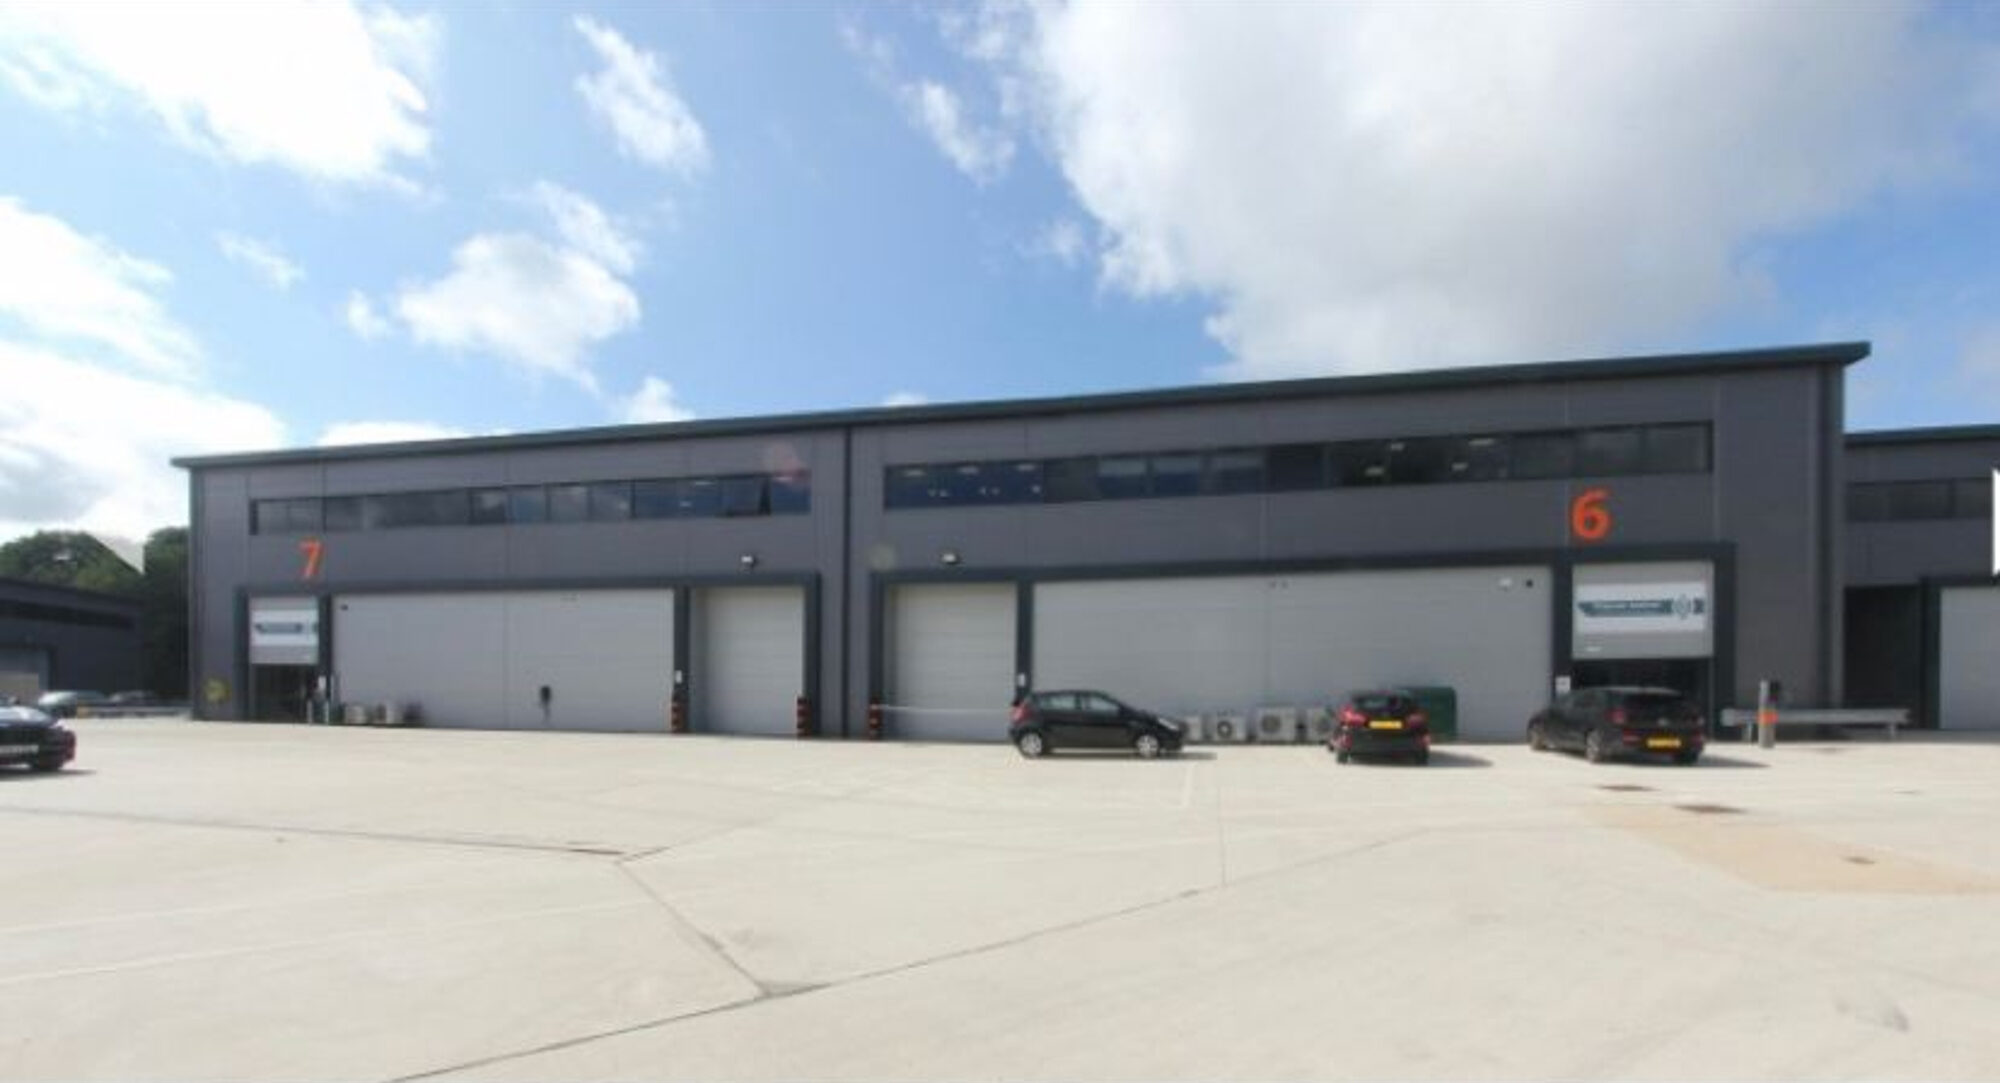 Military packaging solutions production center in England